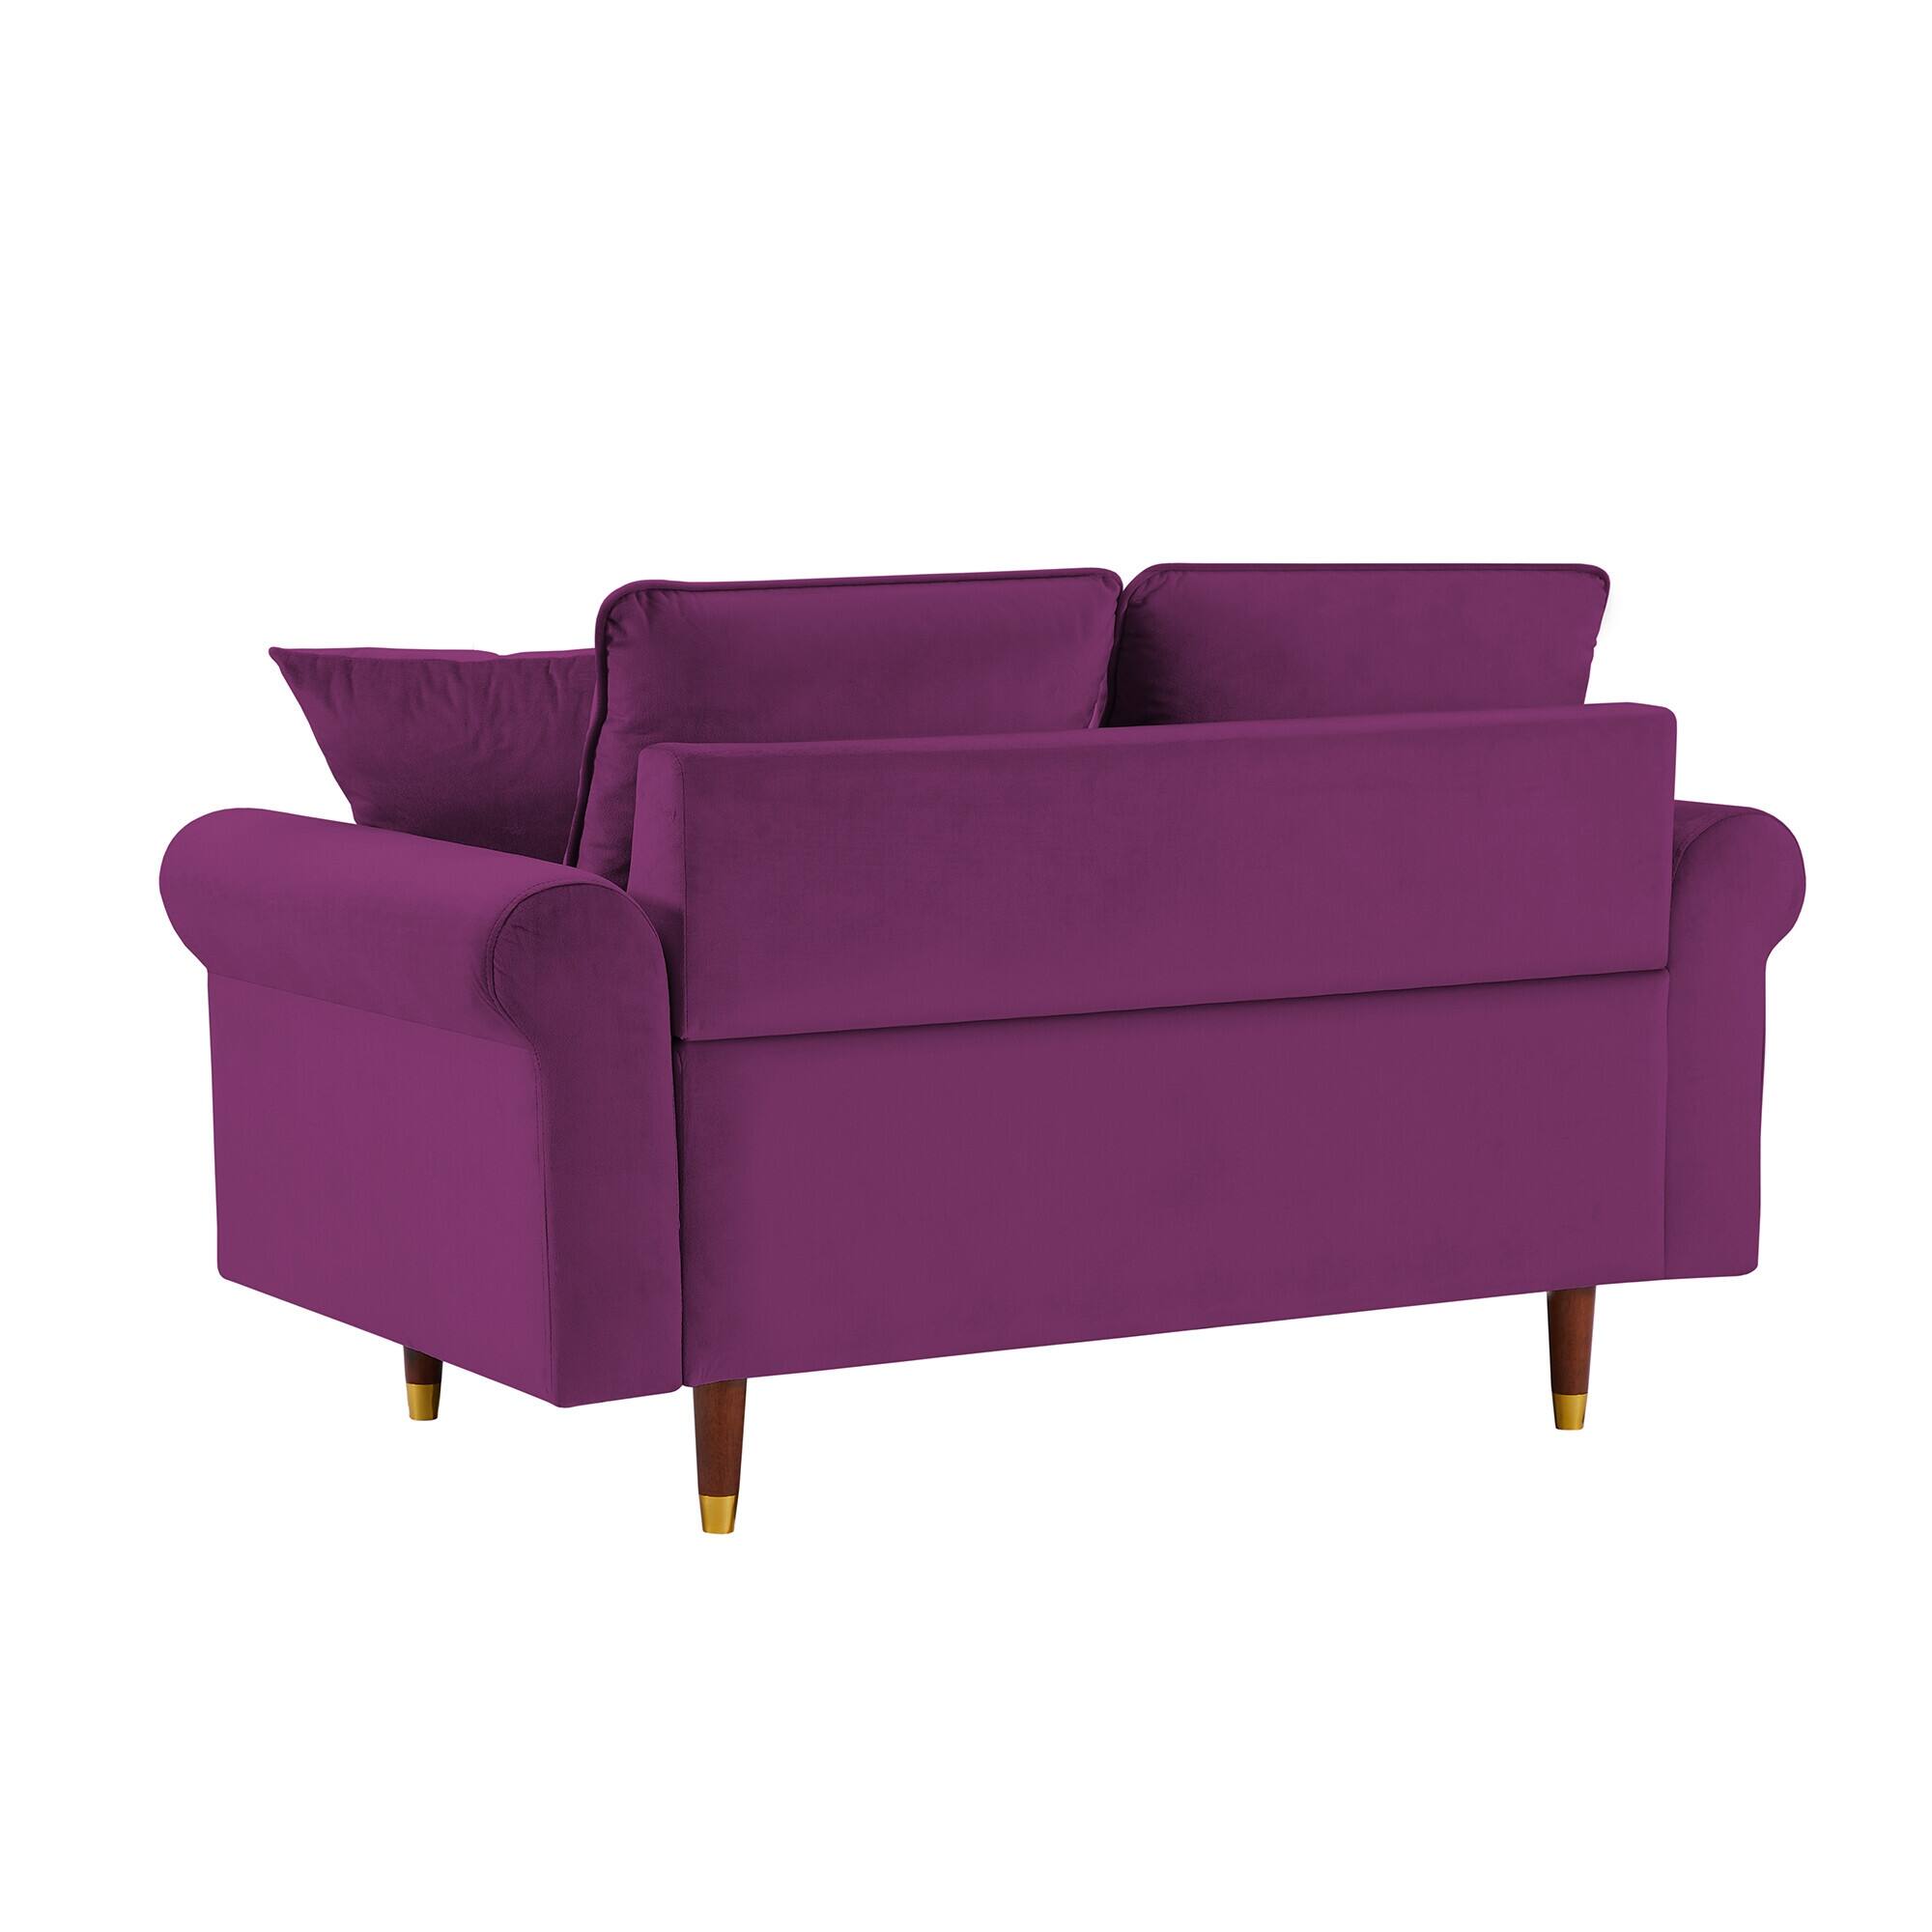 Modern Velvet Sofa Couch with 2 Pillows, Loveseat Sofa with Wood Legs